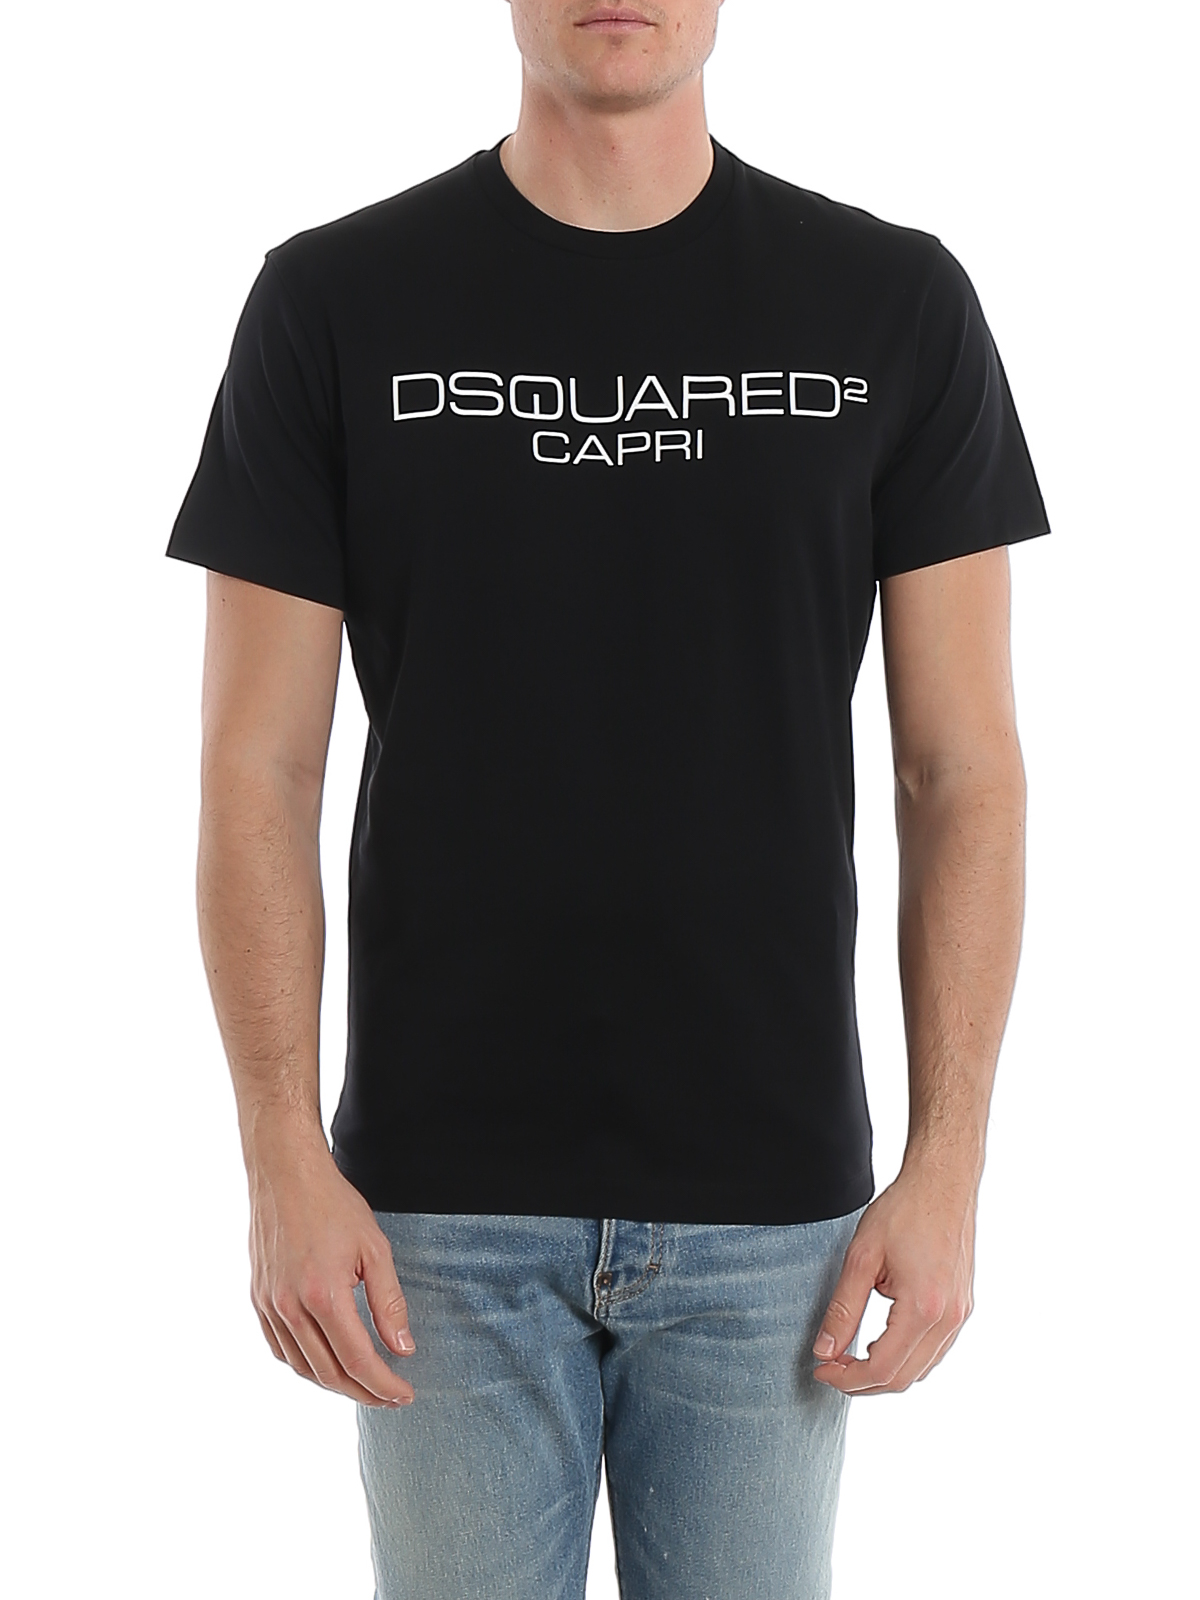 Dsquared2 Black T Shirt Top Sellers, 52% OFF | barsauvage.com